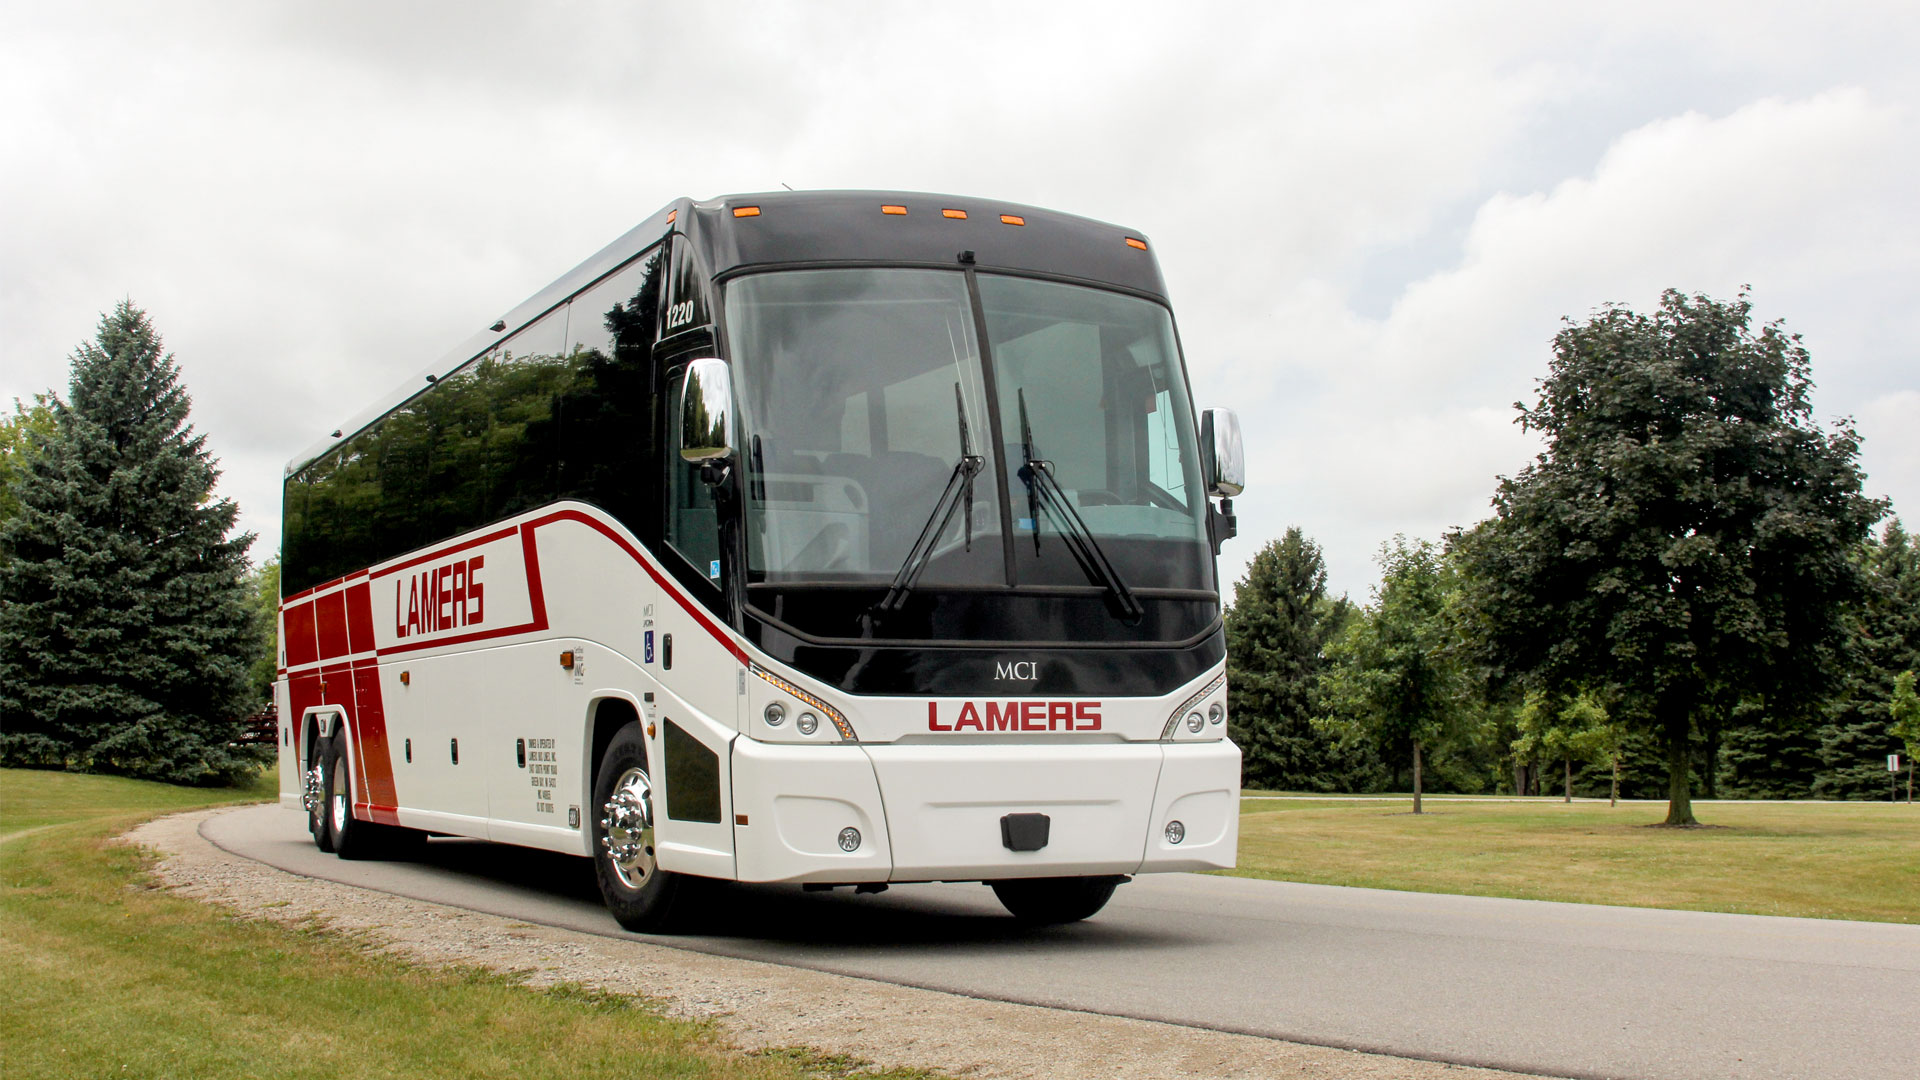 Lamers Tour and Travel